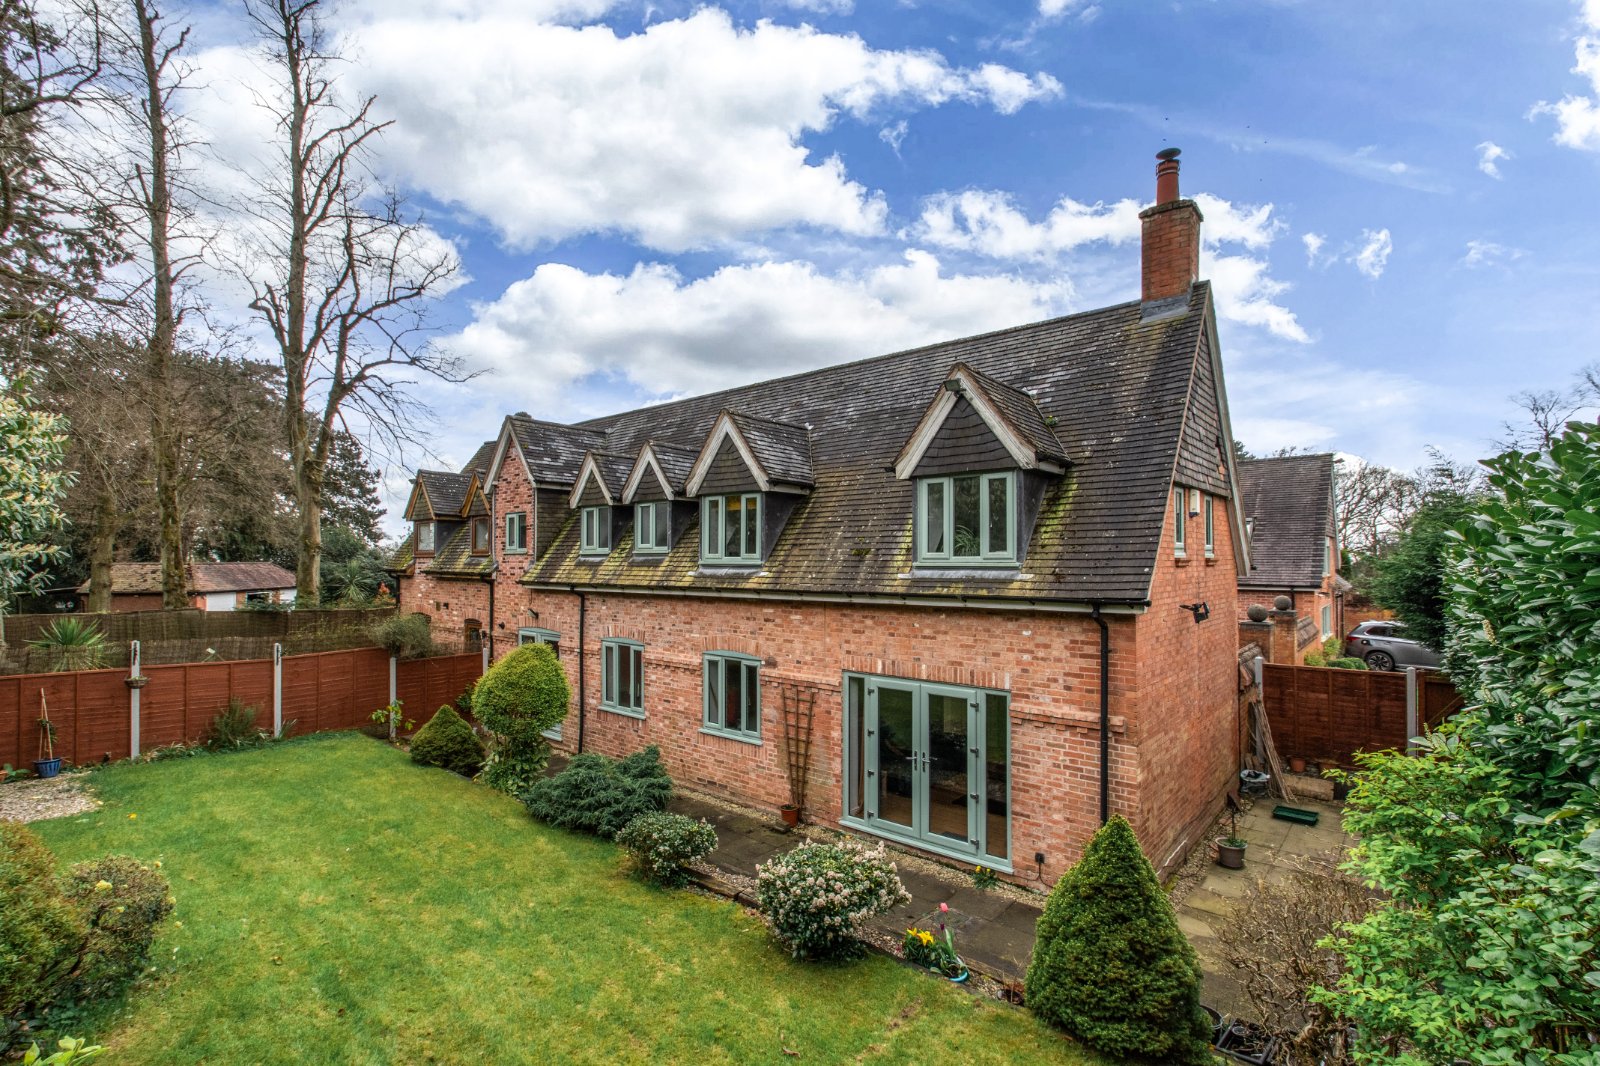 4 bed  for sale in Linthurst Road, Barnt Green 12